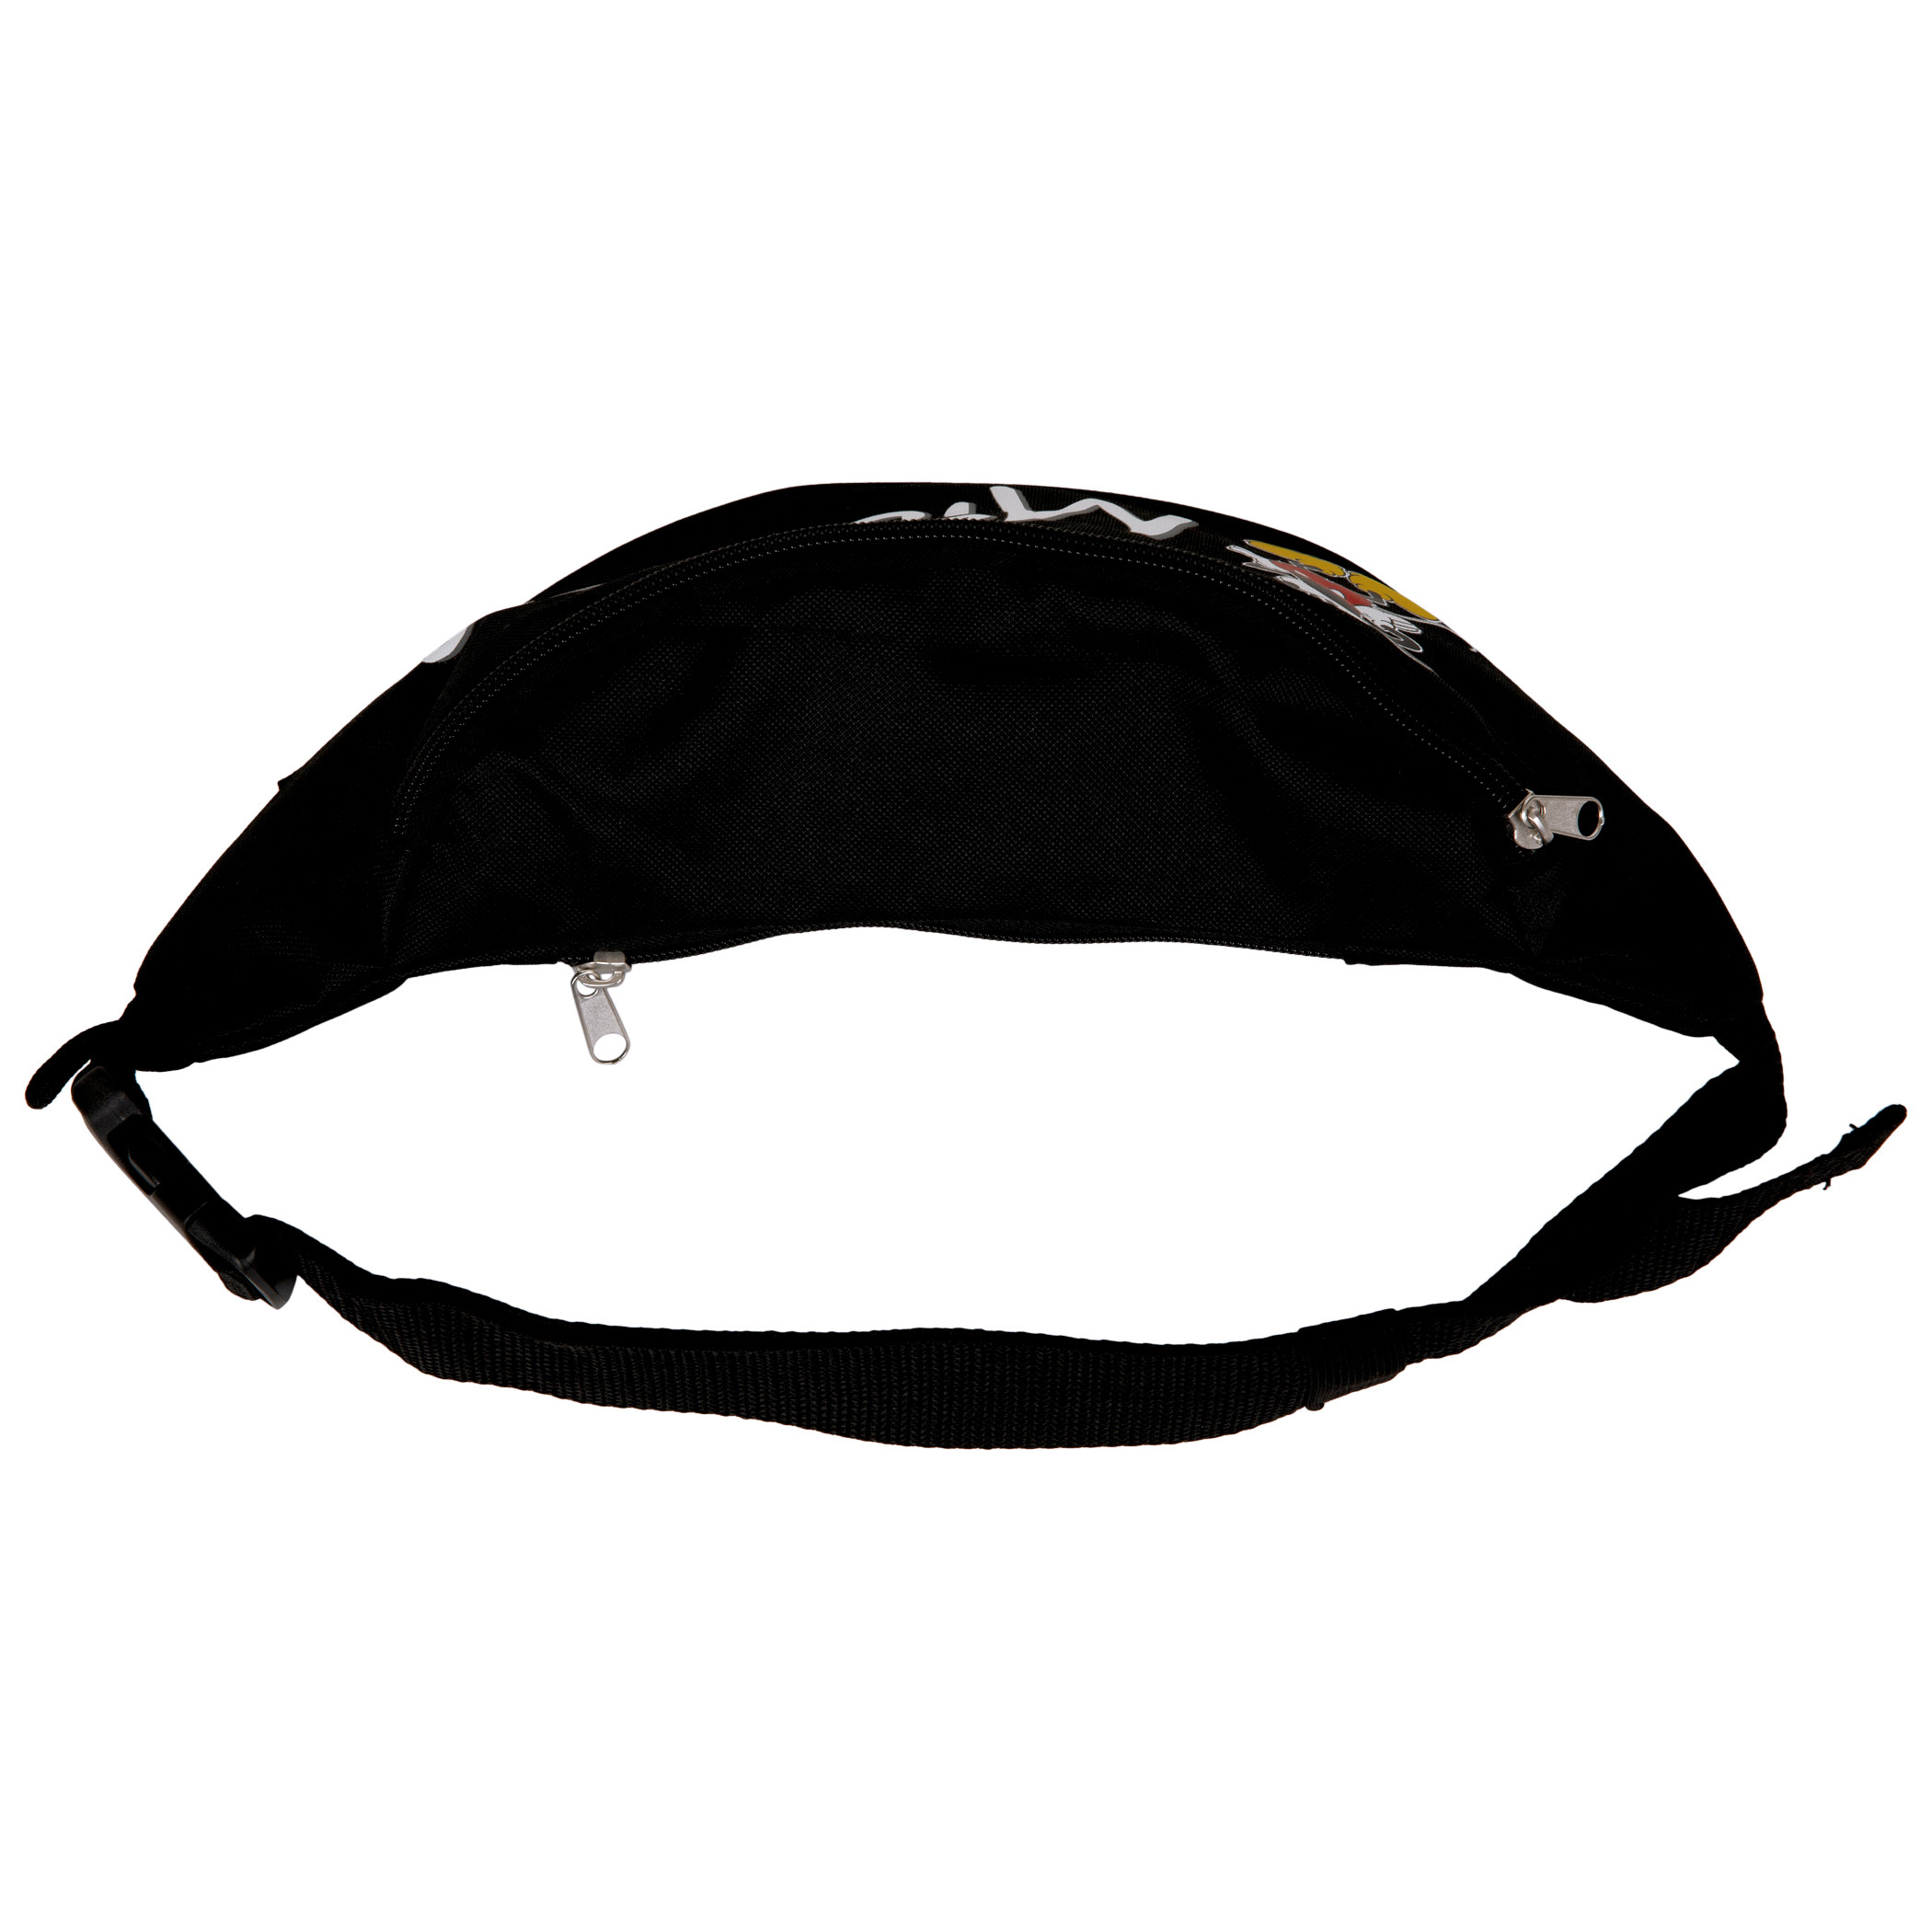 Mickey Mouse Disney Calligraphy Fanny Pack